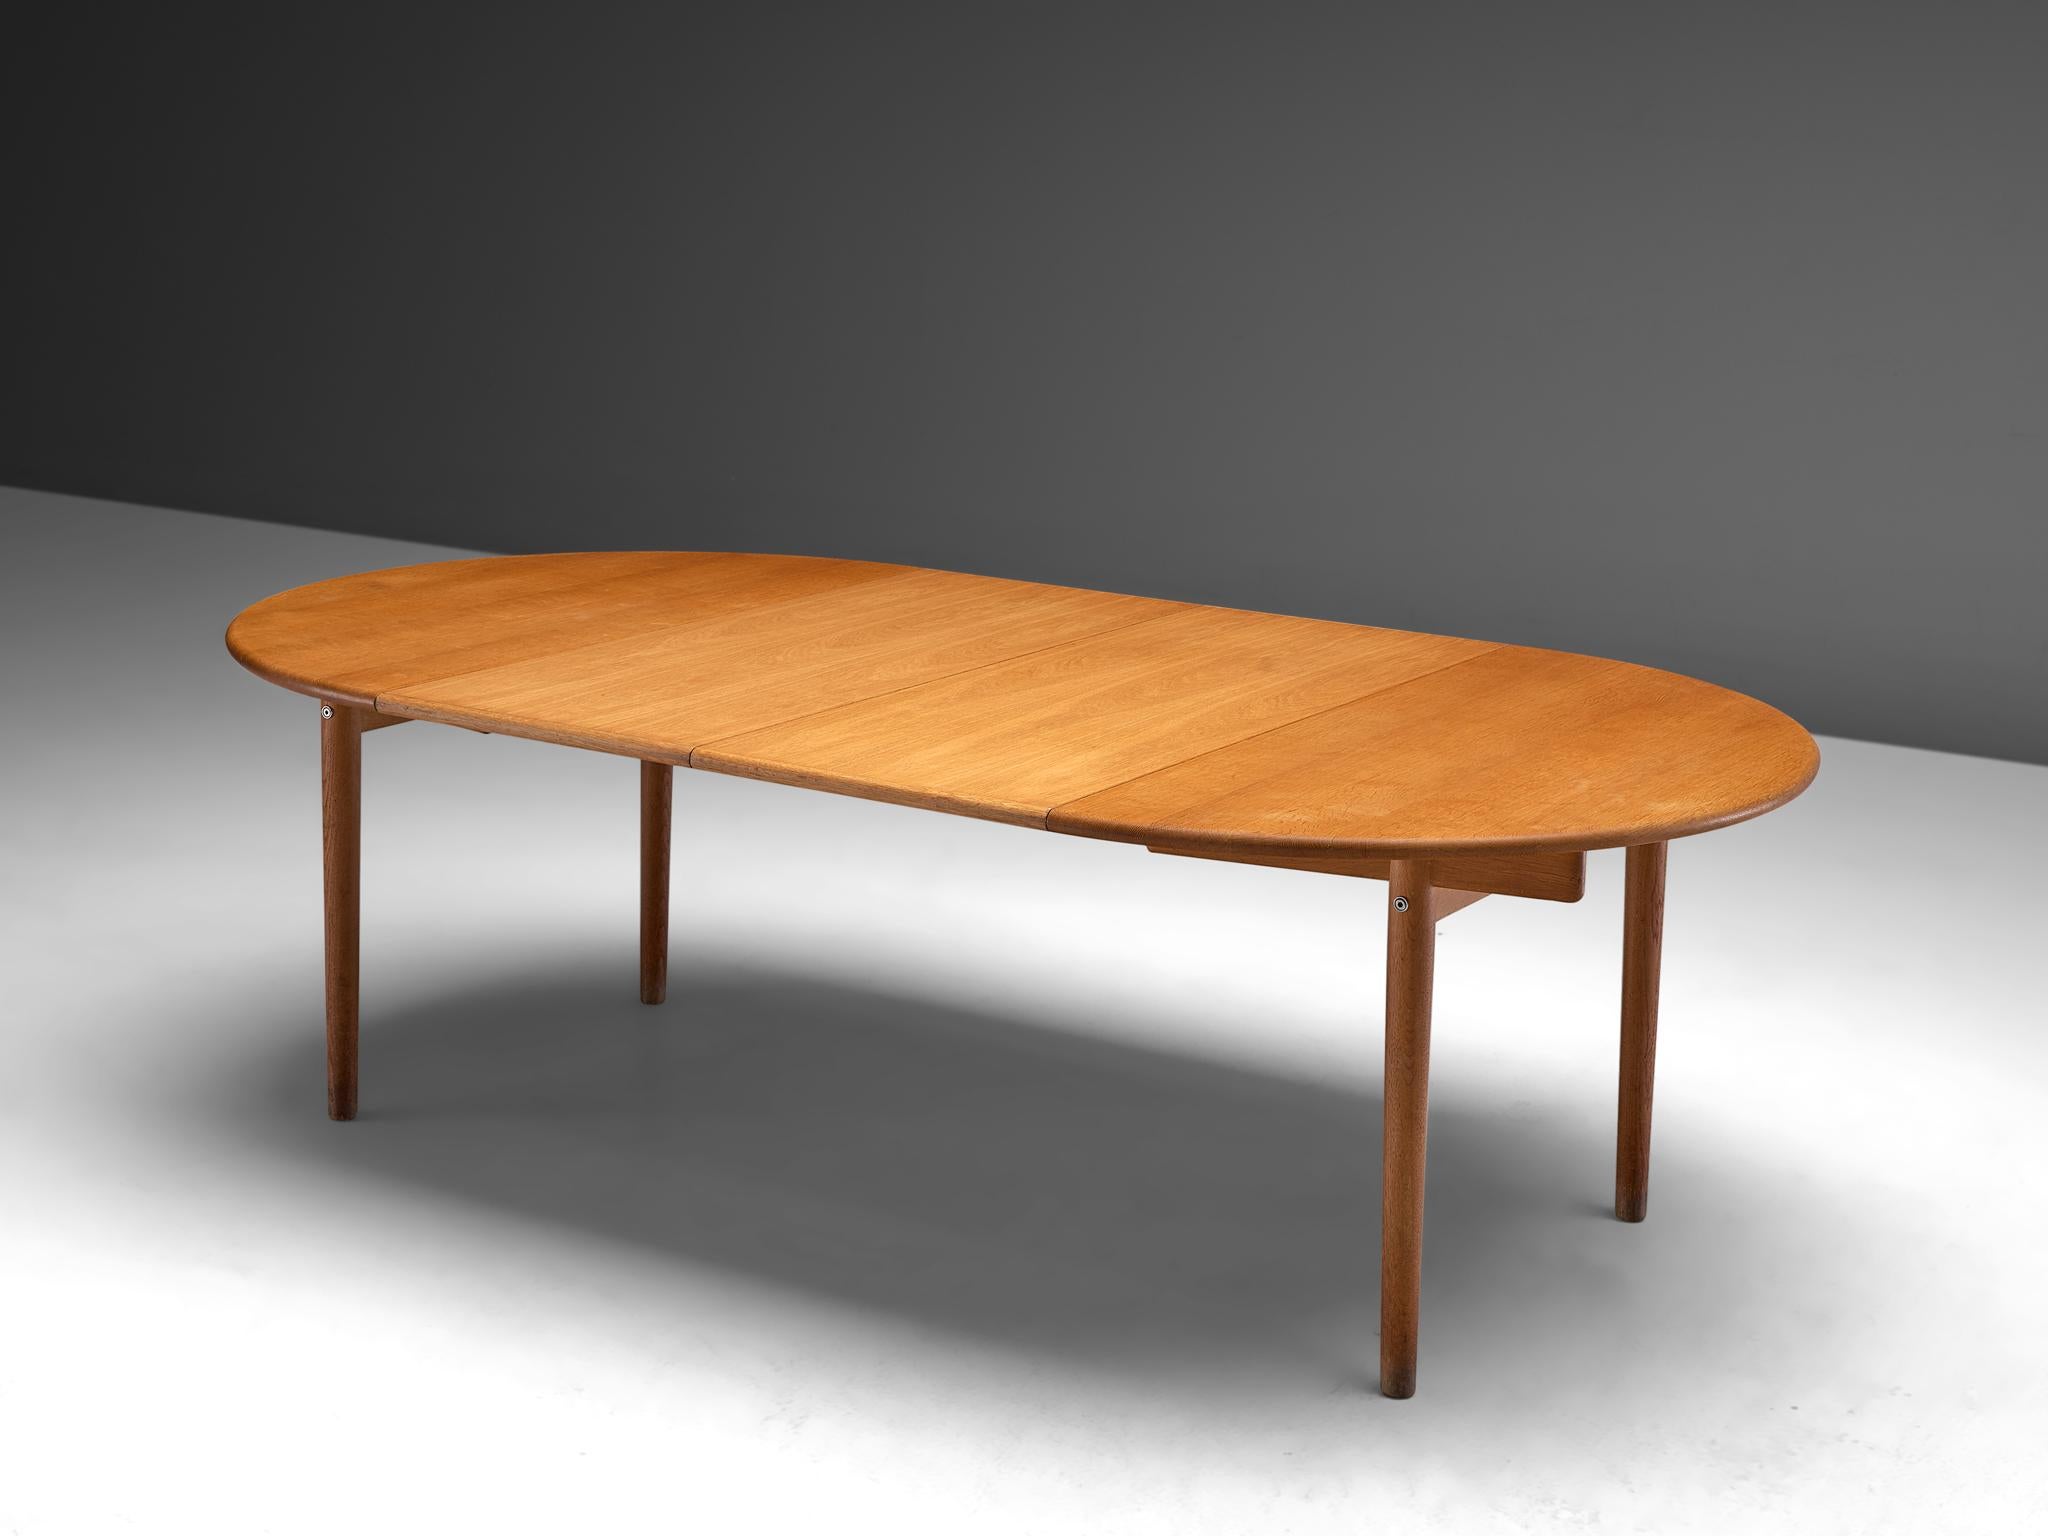 Hans J. Wegner for PP Mobler, PP70 dining table', oak, Denmark, 1975.

This extendable dining table designed by Hans J. Wegner is executed in oak and has additional leaves in order to expand the piece 126 cm to 230 cm. The table features a modest